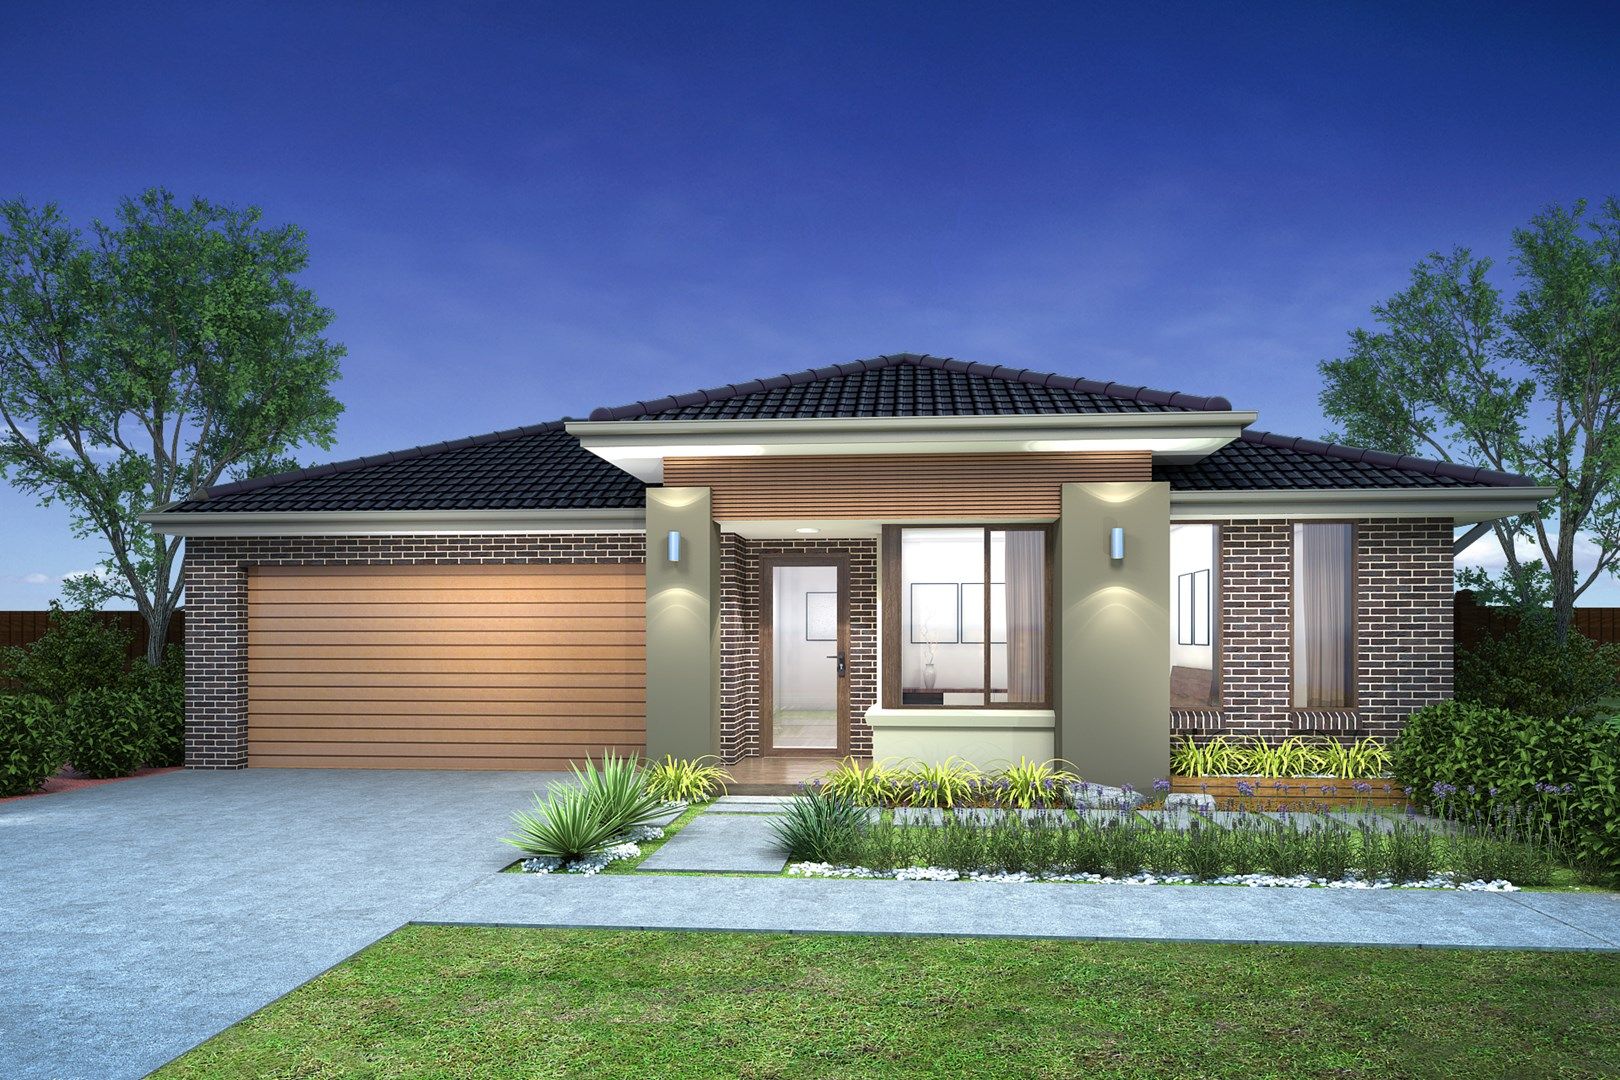 4 bedrooms New House & Land in Lot 540 Taylors Run Estate FRASER RISE VIC, 3336